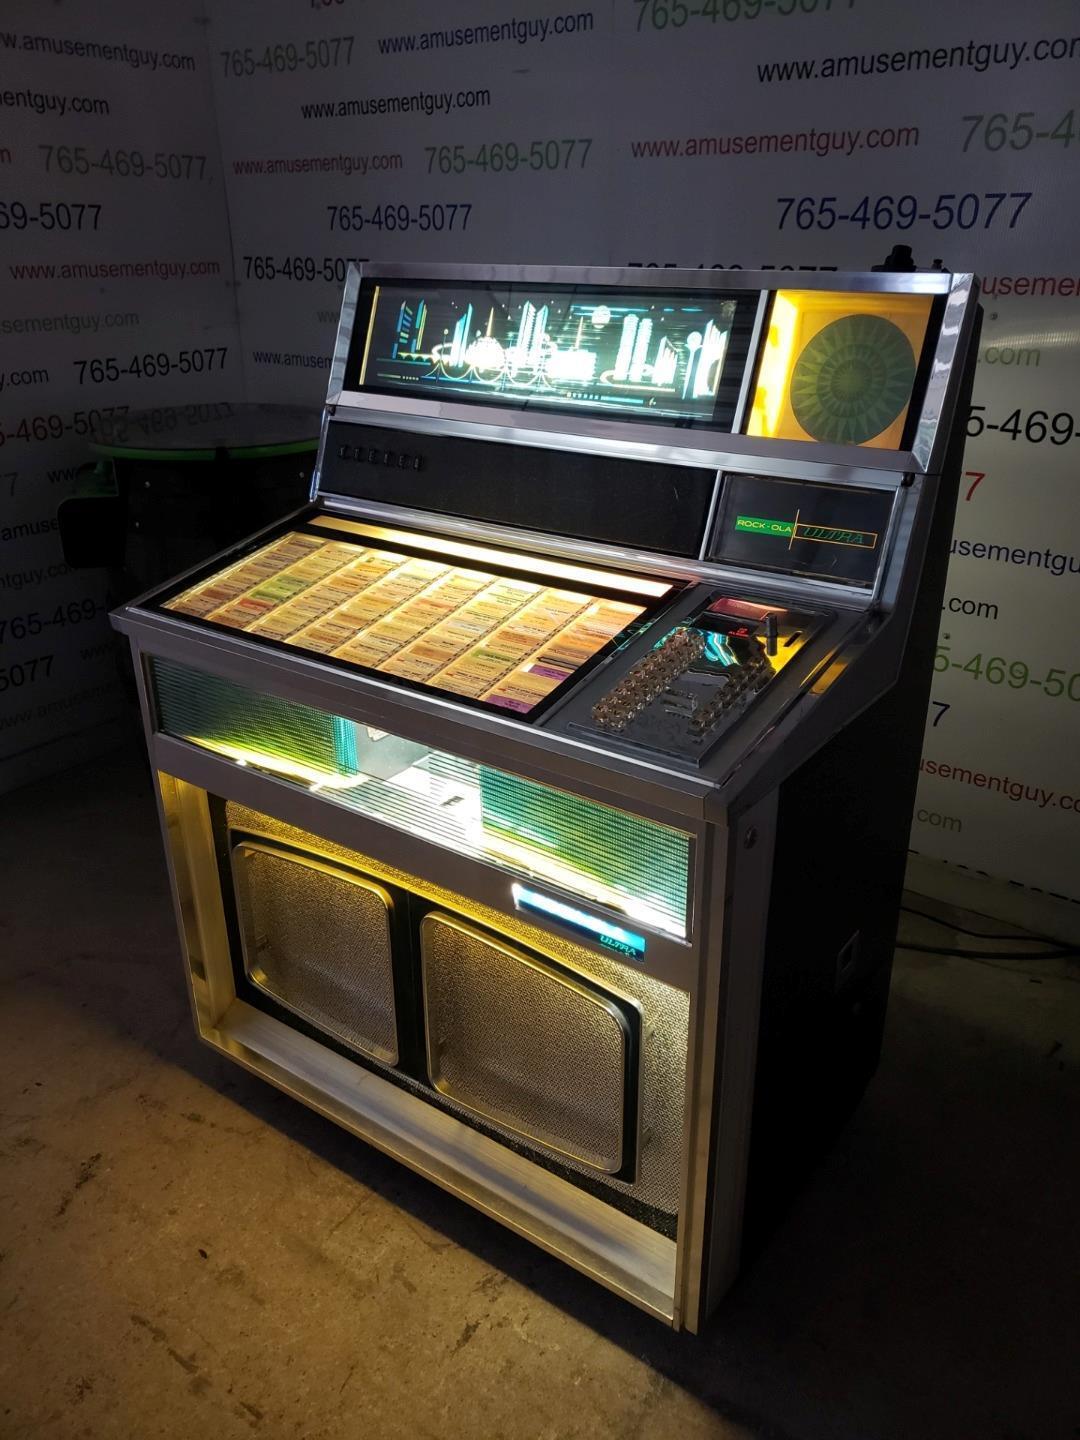 ROCK-OLA Ultra Jukebox- Includes some demo 45's